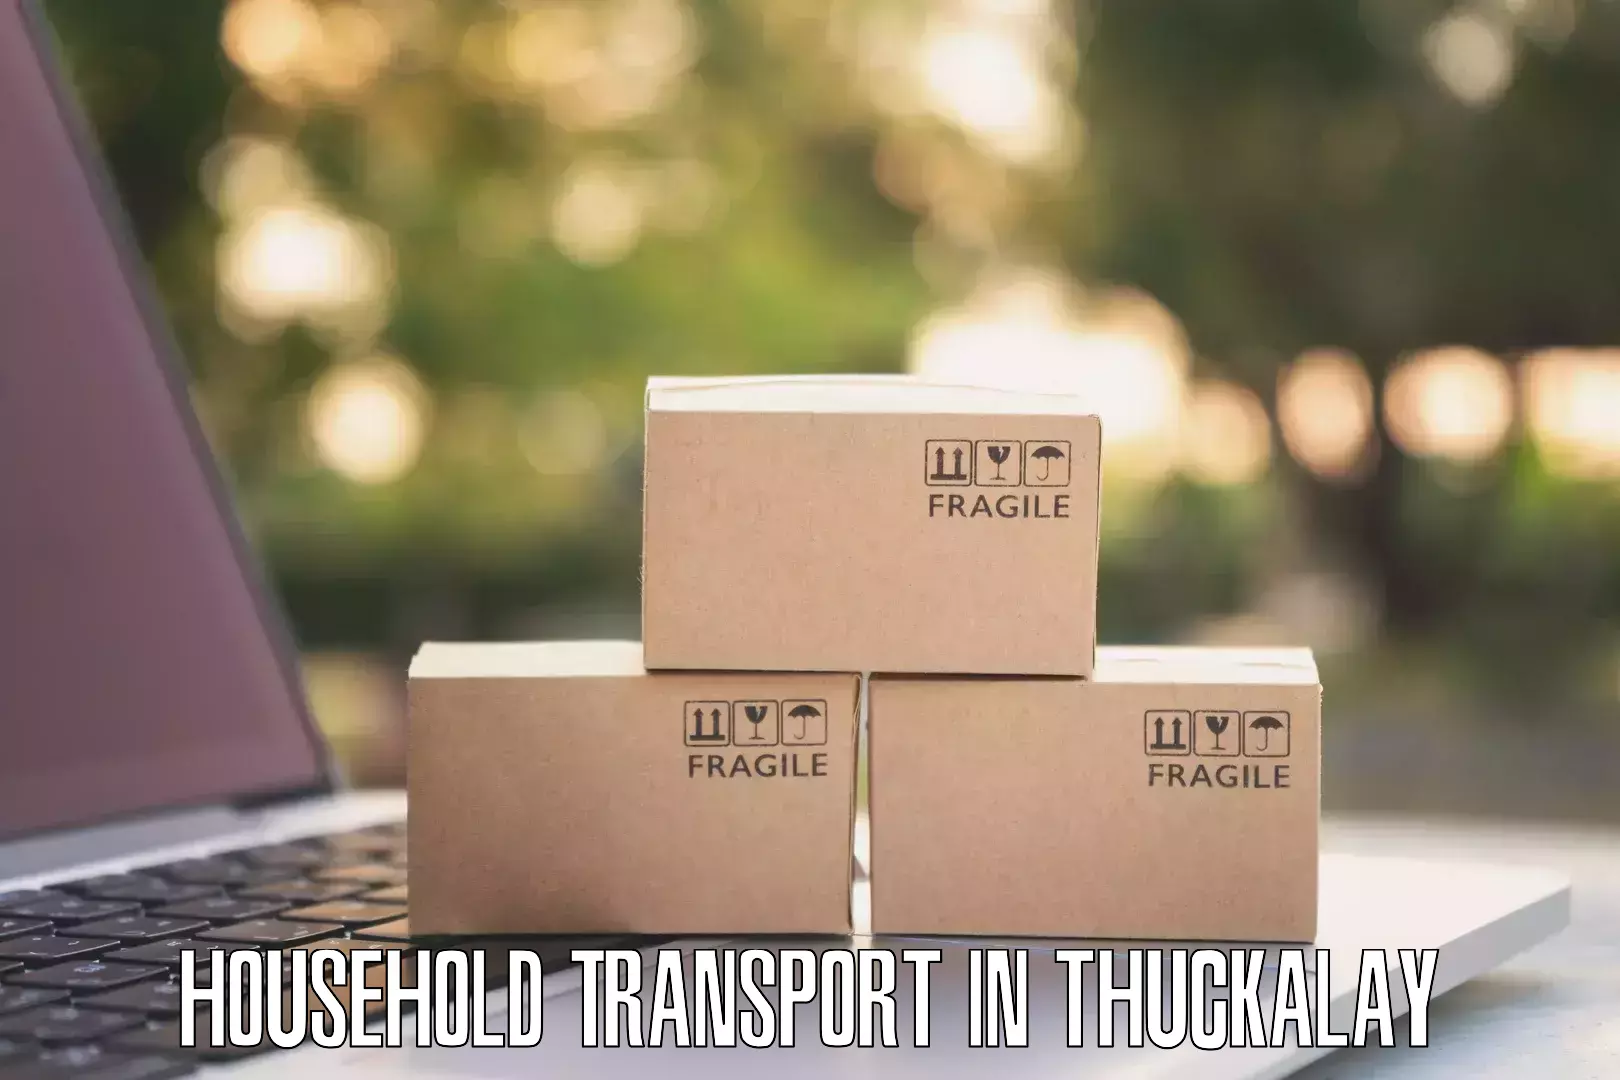 Expert goods movers in Thuckalay